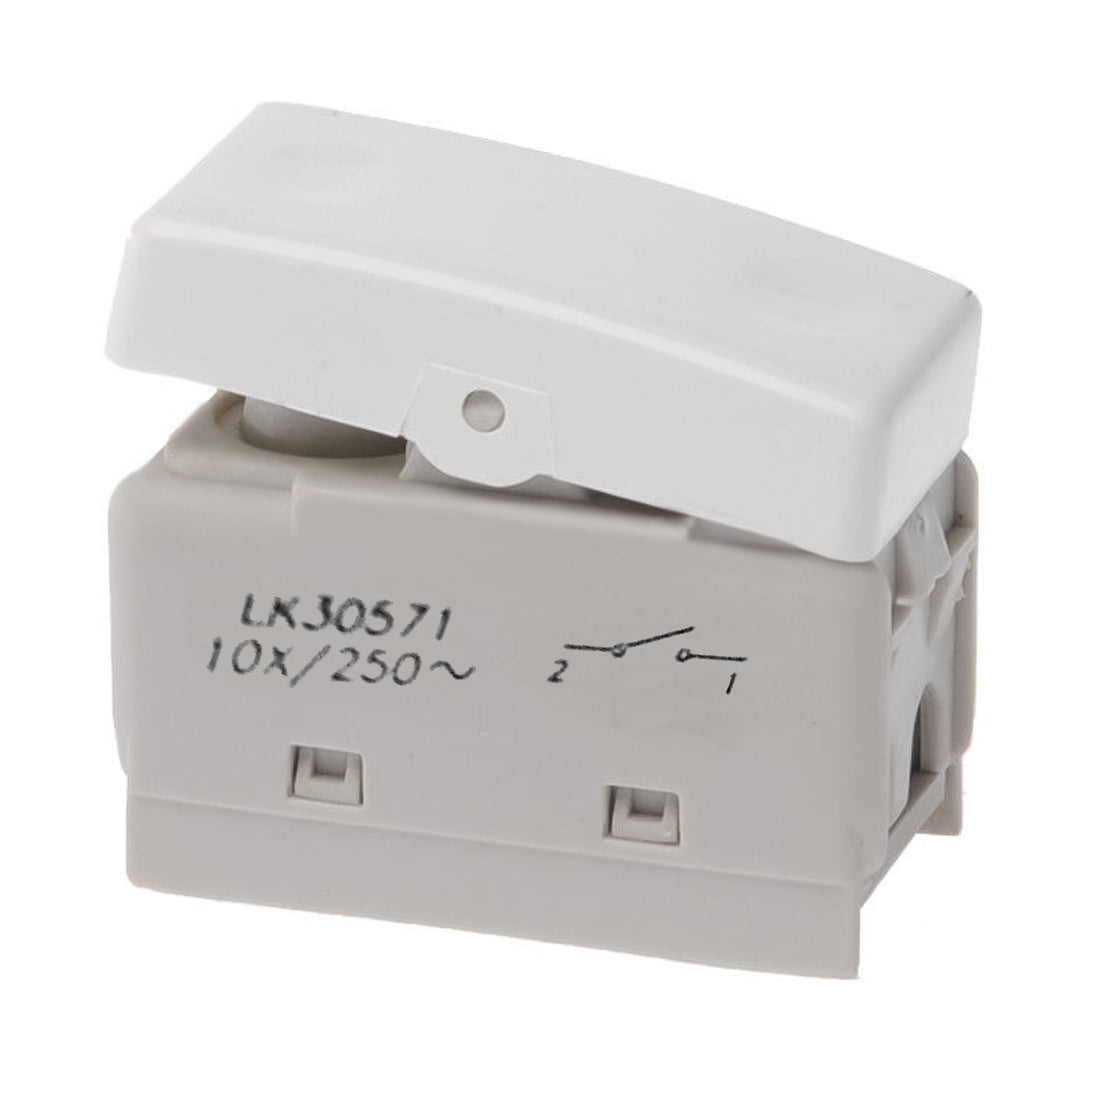 Lumitek LK30571 Electrical diverter 250V-10A compatible with Gewiss domestic series, 1P single module switch, white switch button